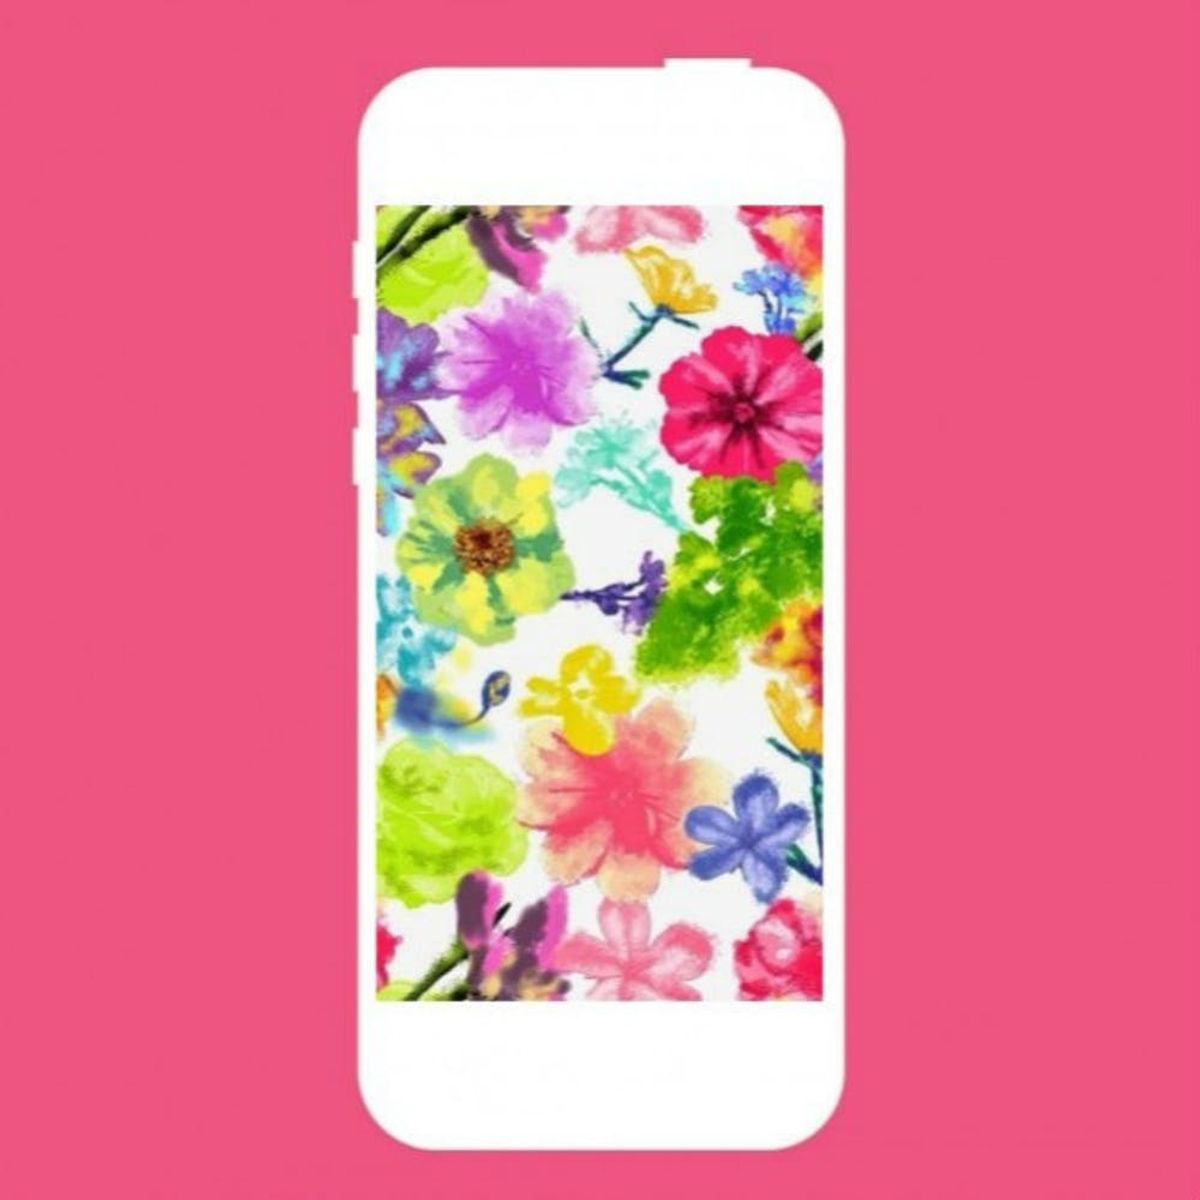 12 Floral iPhone Wallpapers to Download for Spring